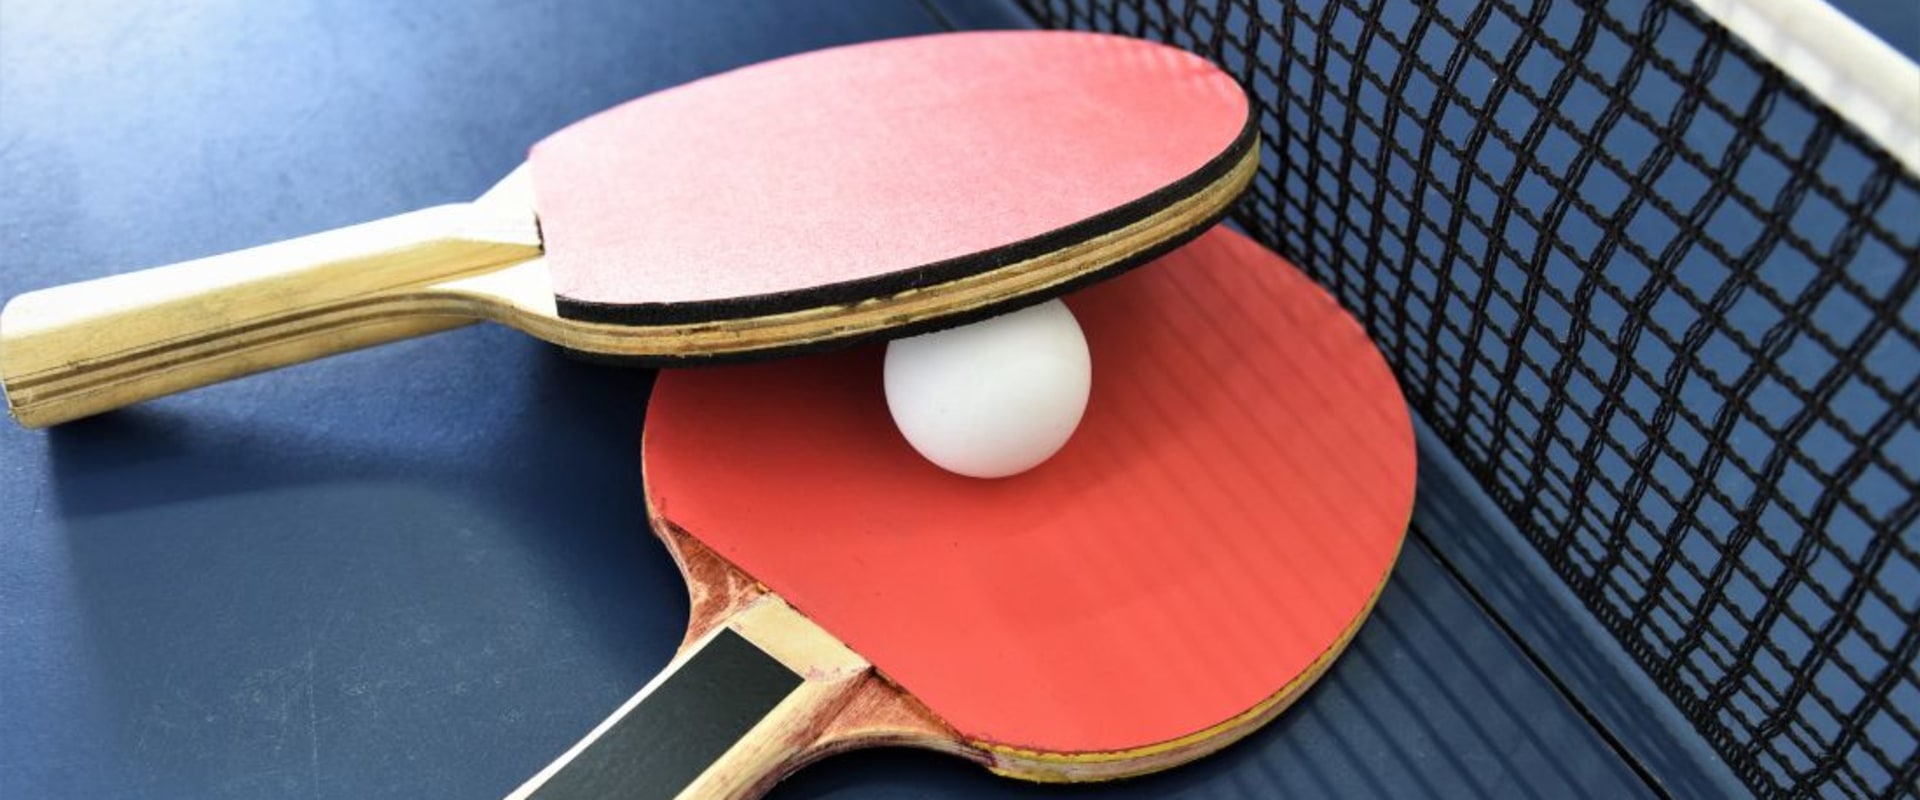 Table Tennis Rules: What You Need to Know